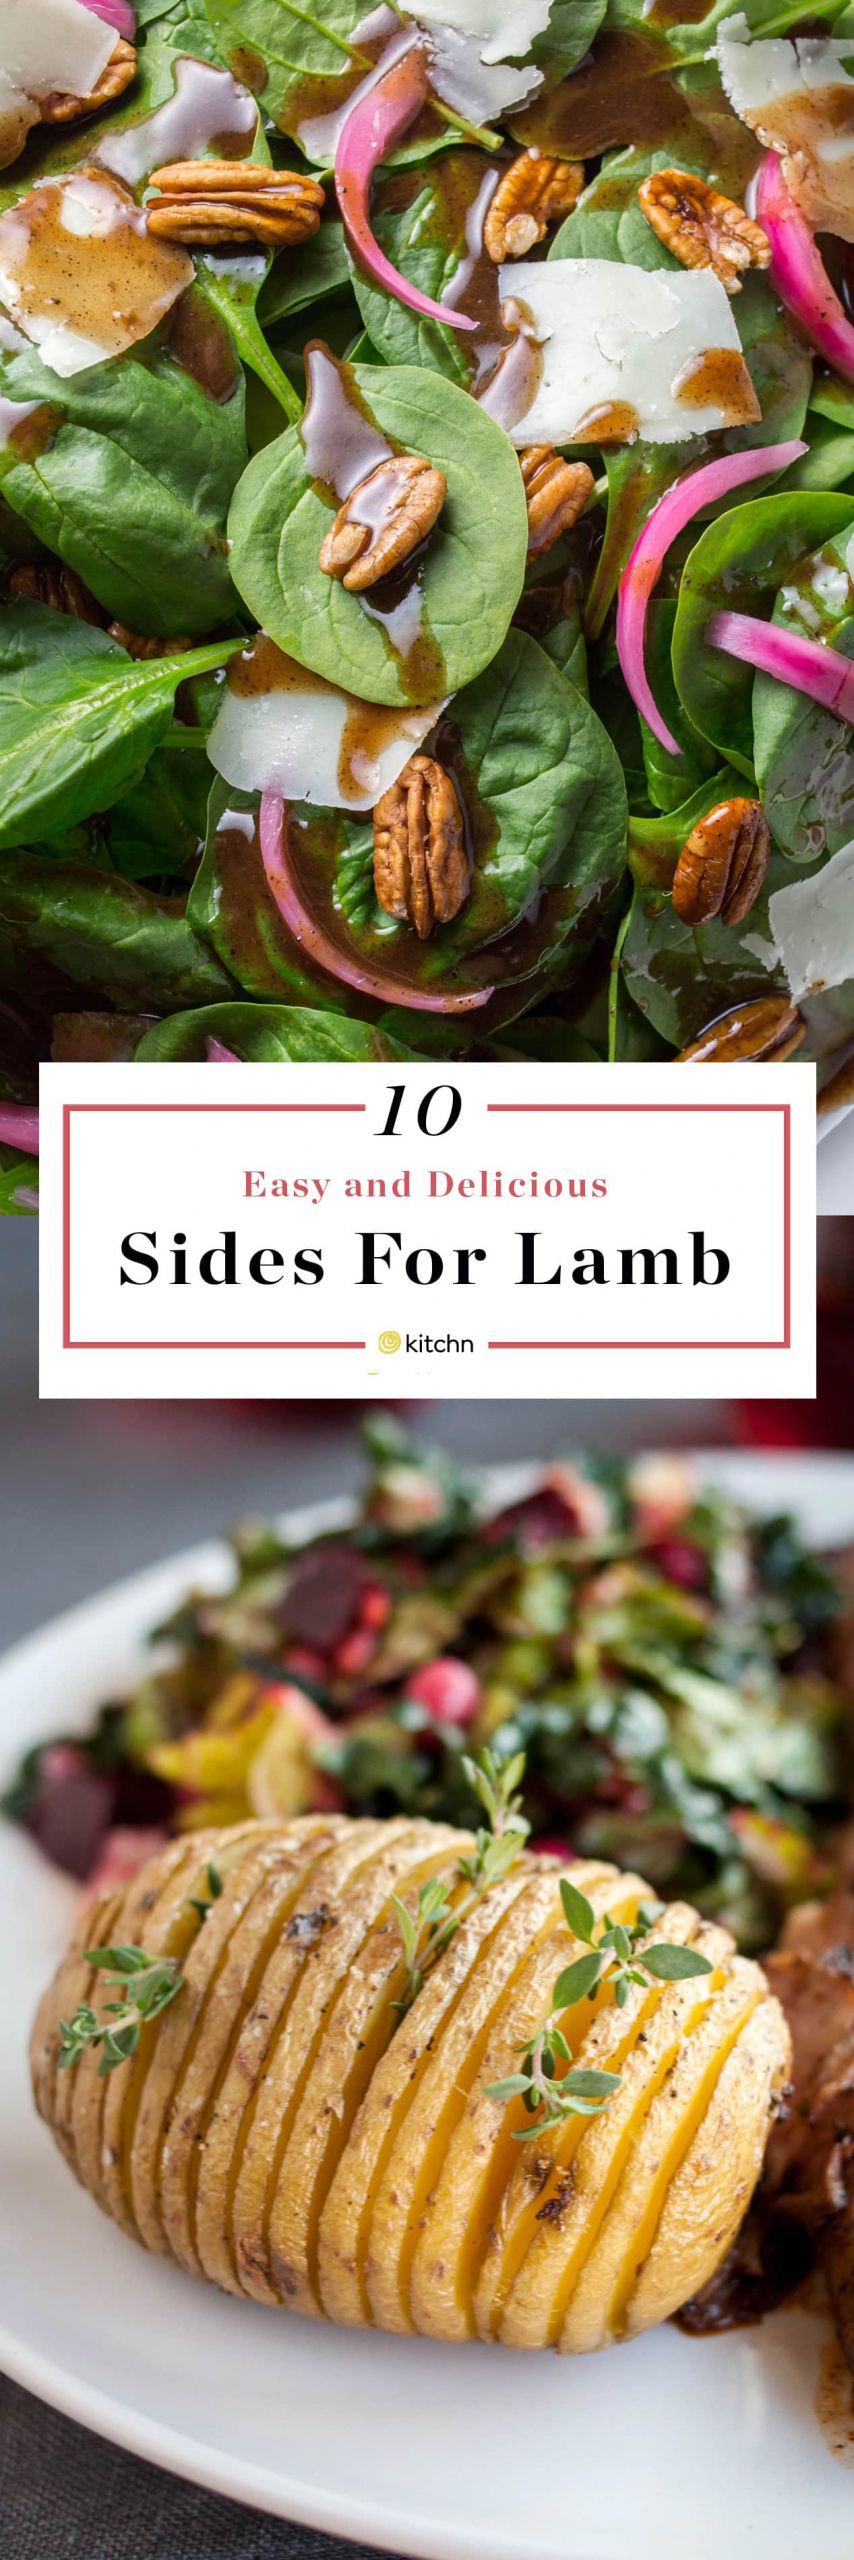 Side Dishes For Lamb
 10 Side Dish Recipes That Are Perfect with Lamb